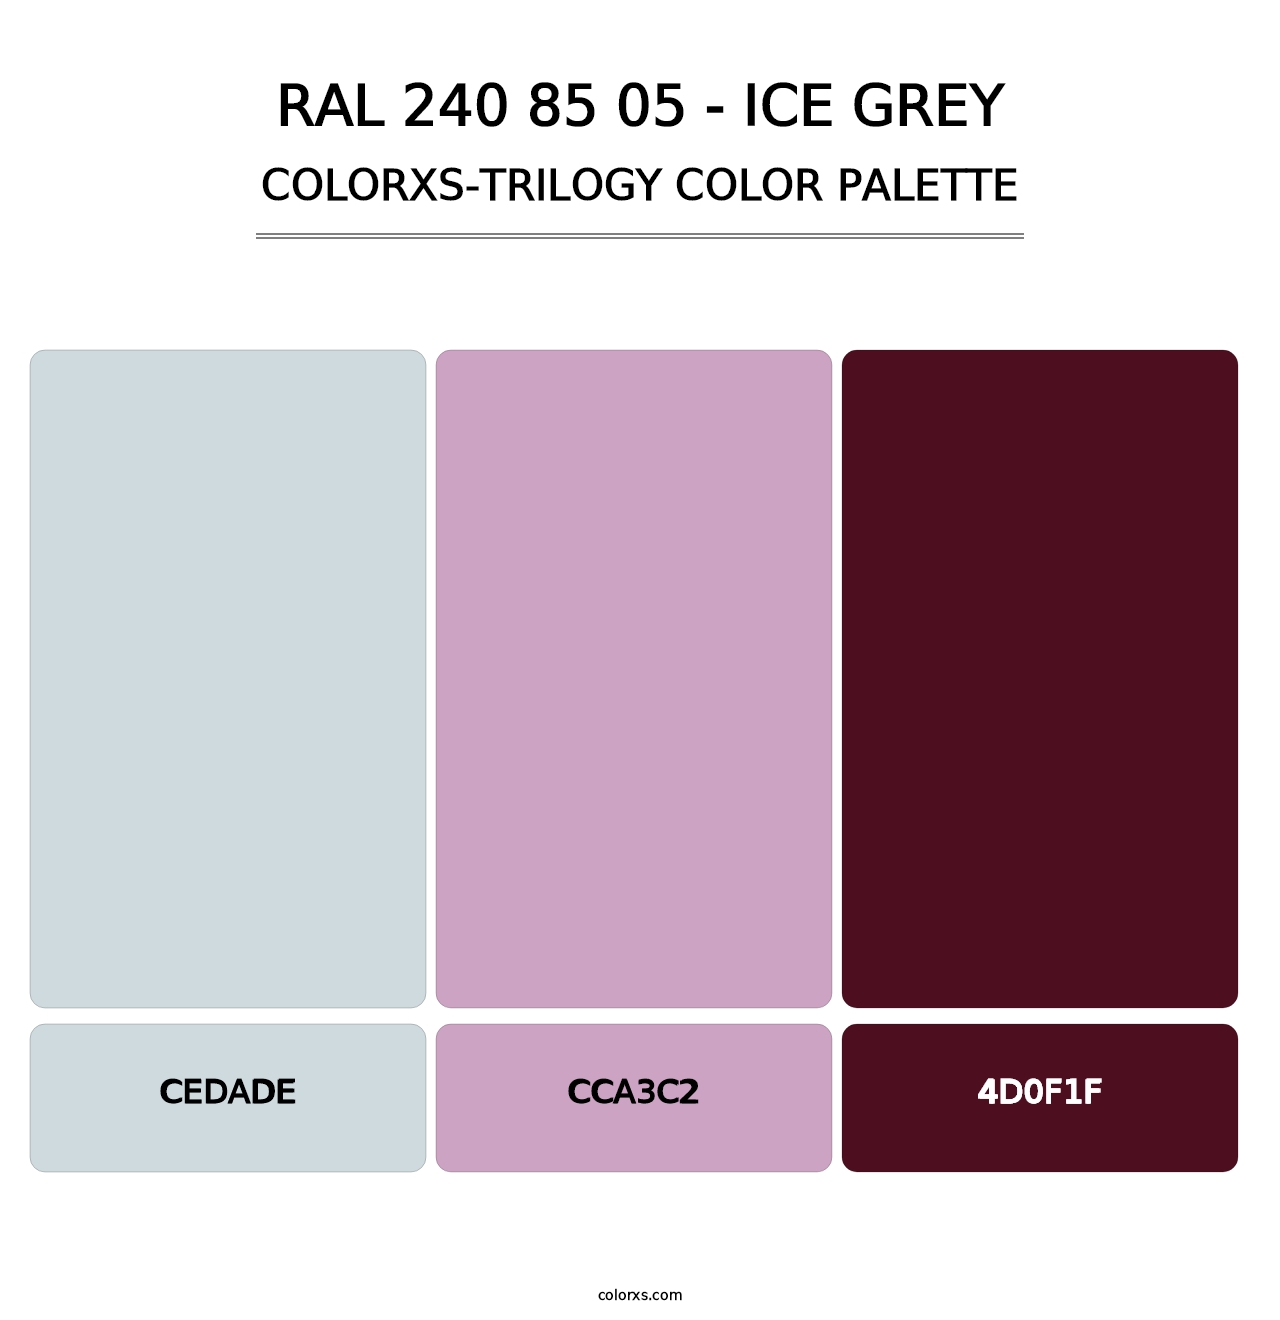 RAL 240 85 05 - Ice Grey - Colorxs Trilogy Palette